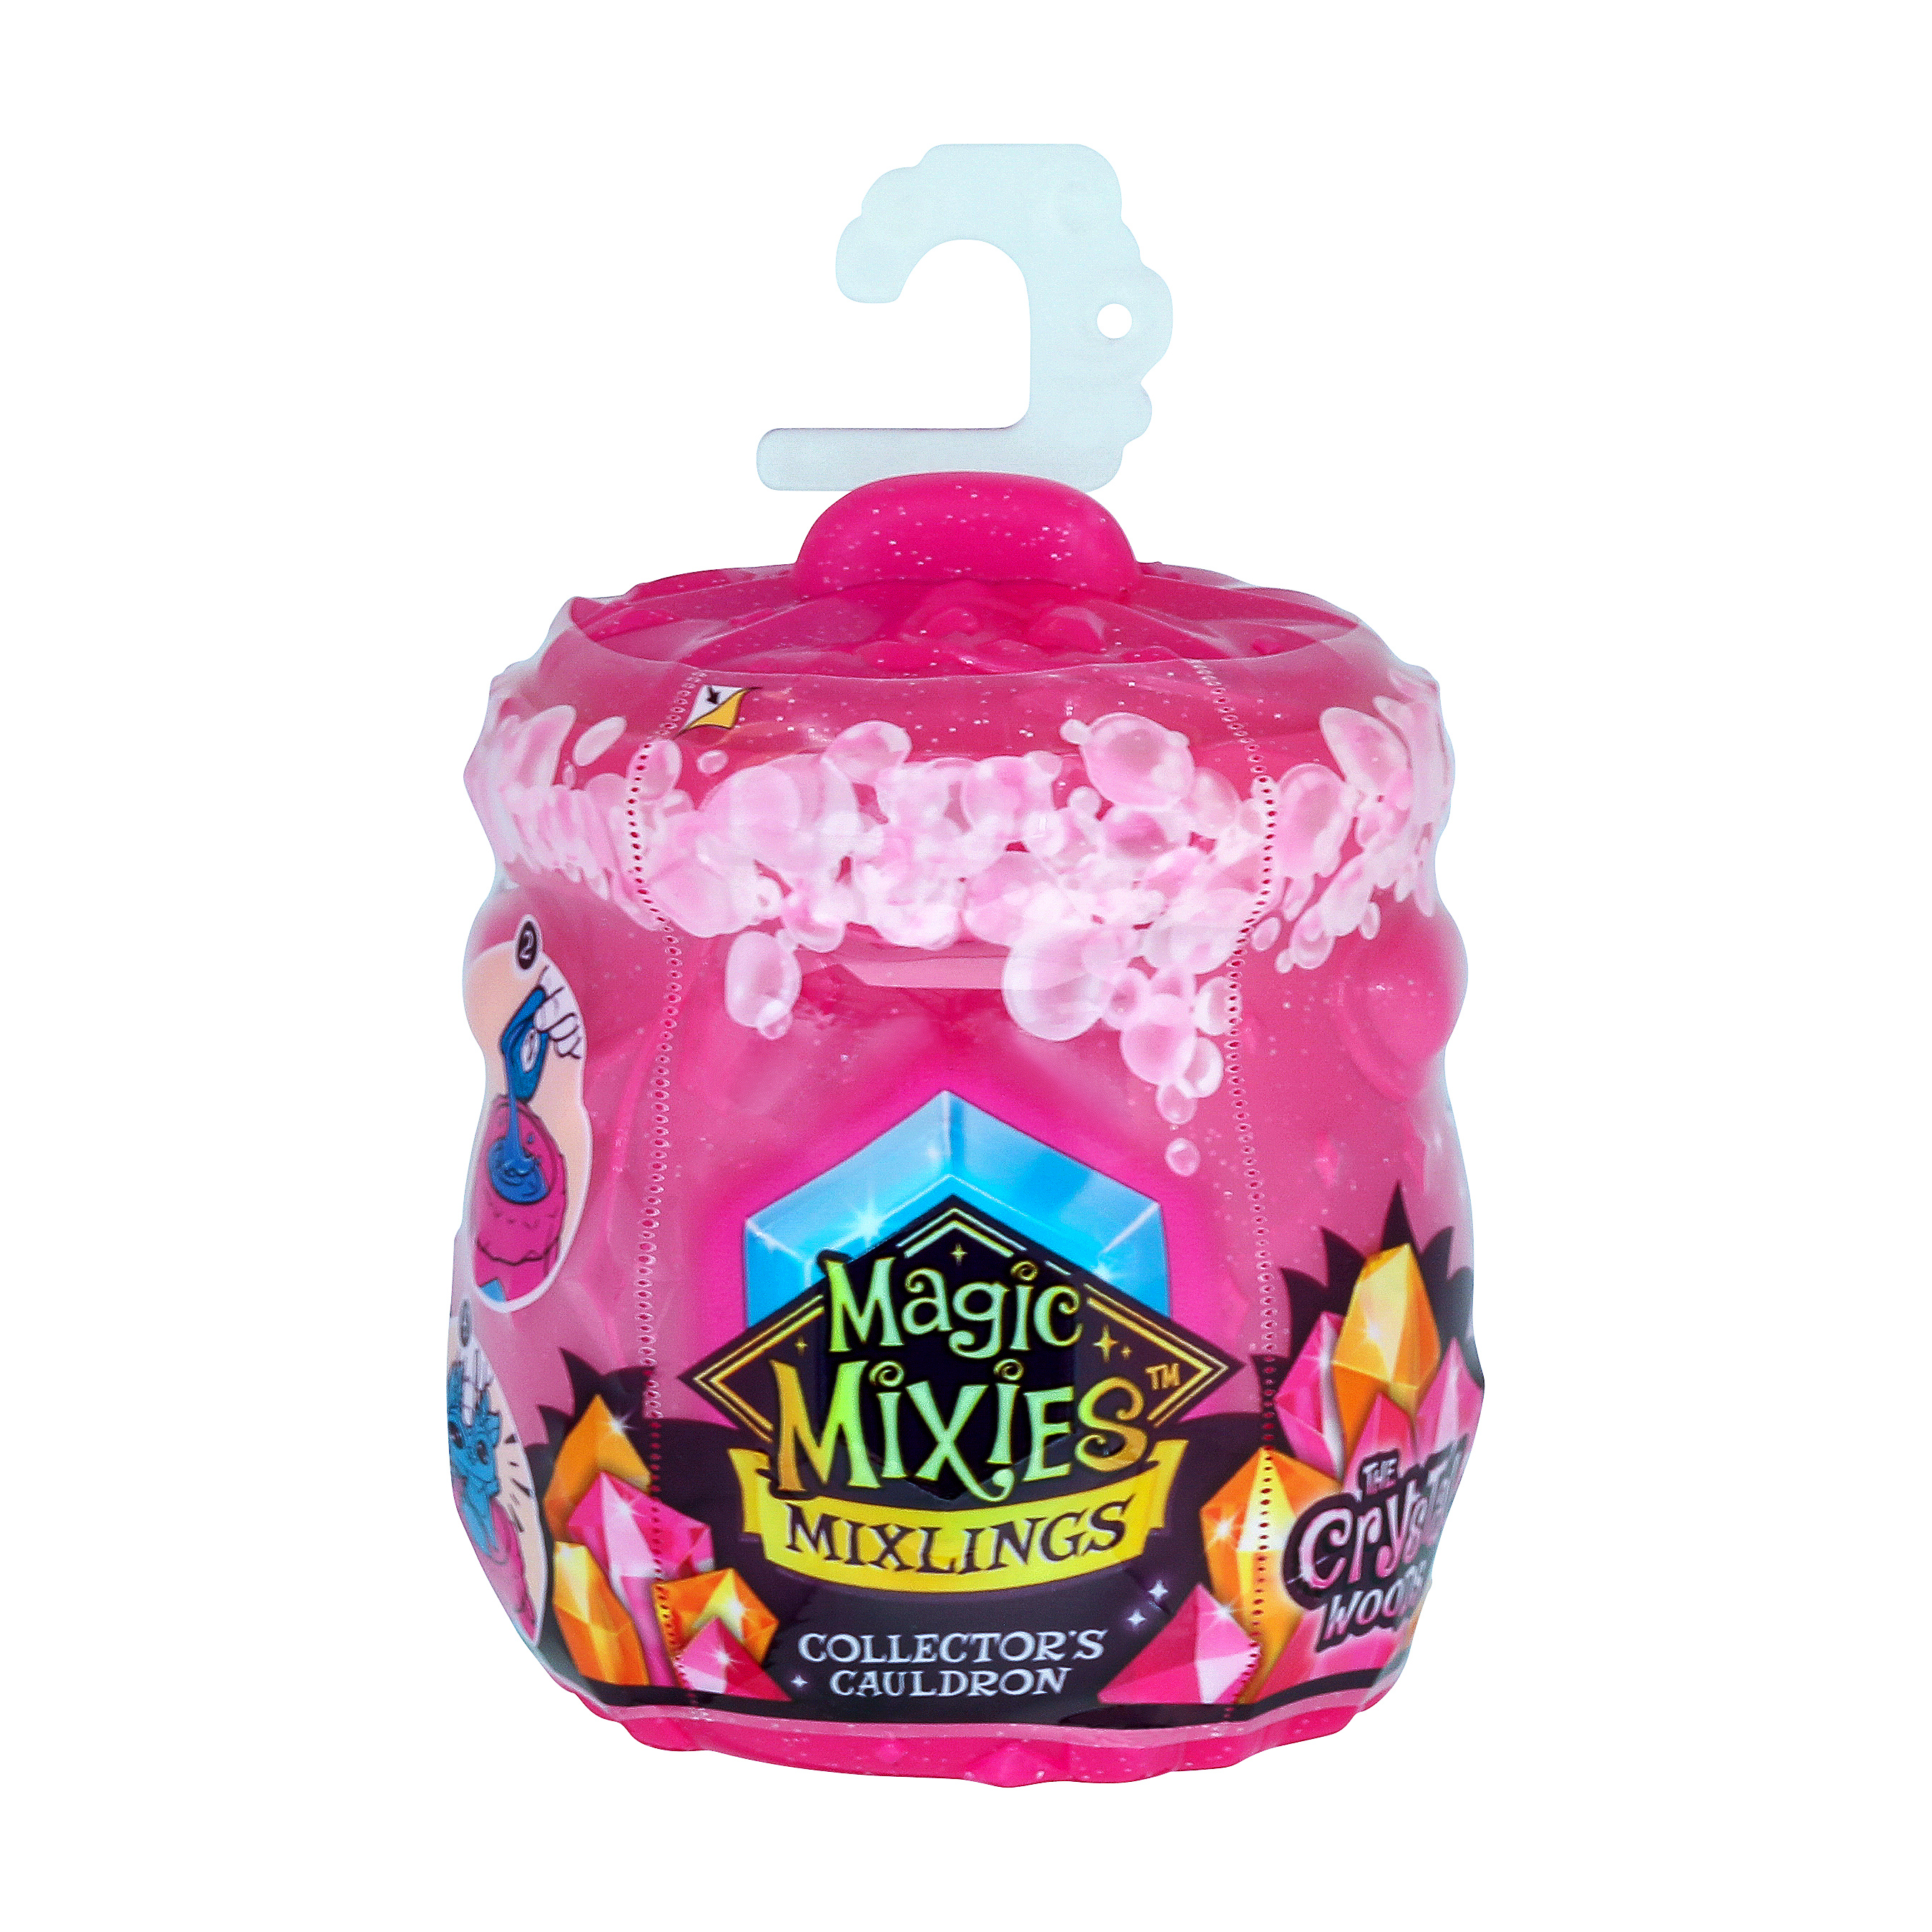 Magic Mixies Mixlings Pink Single Pack with Magical Fizz and Reveal, 40+  Collect, Ages 5+ - image 4 of 18